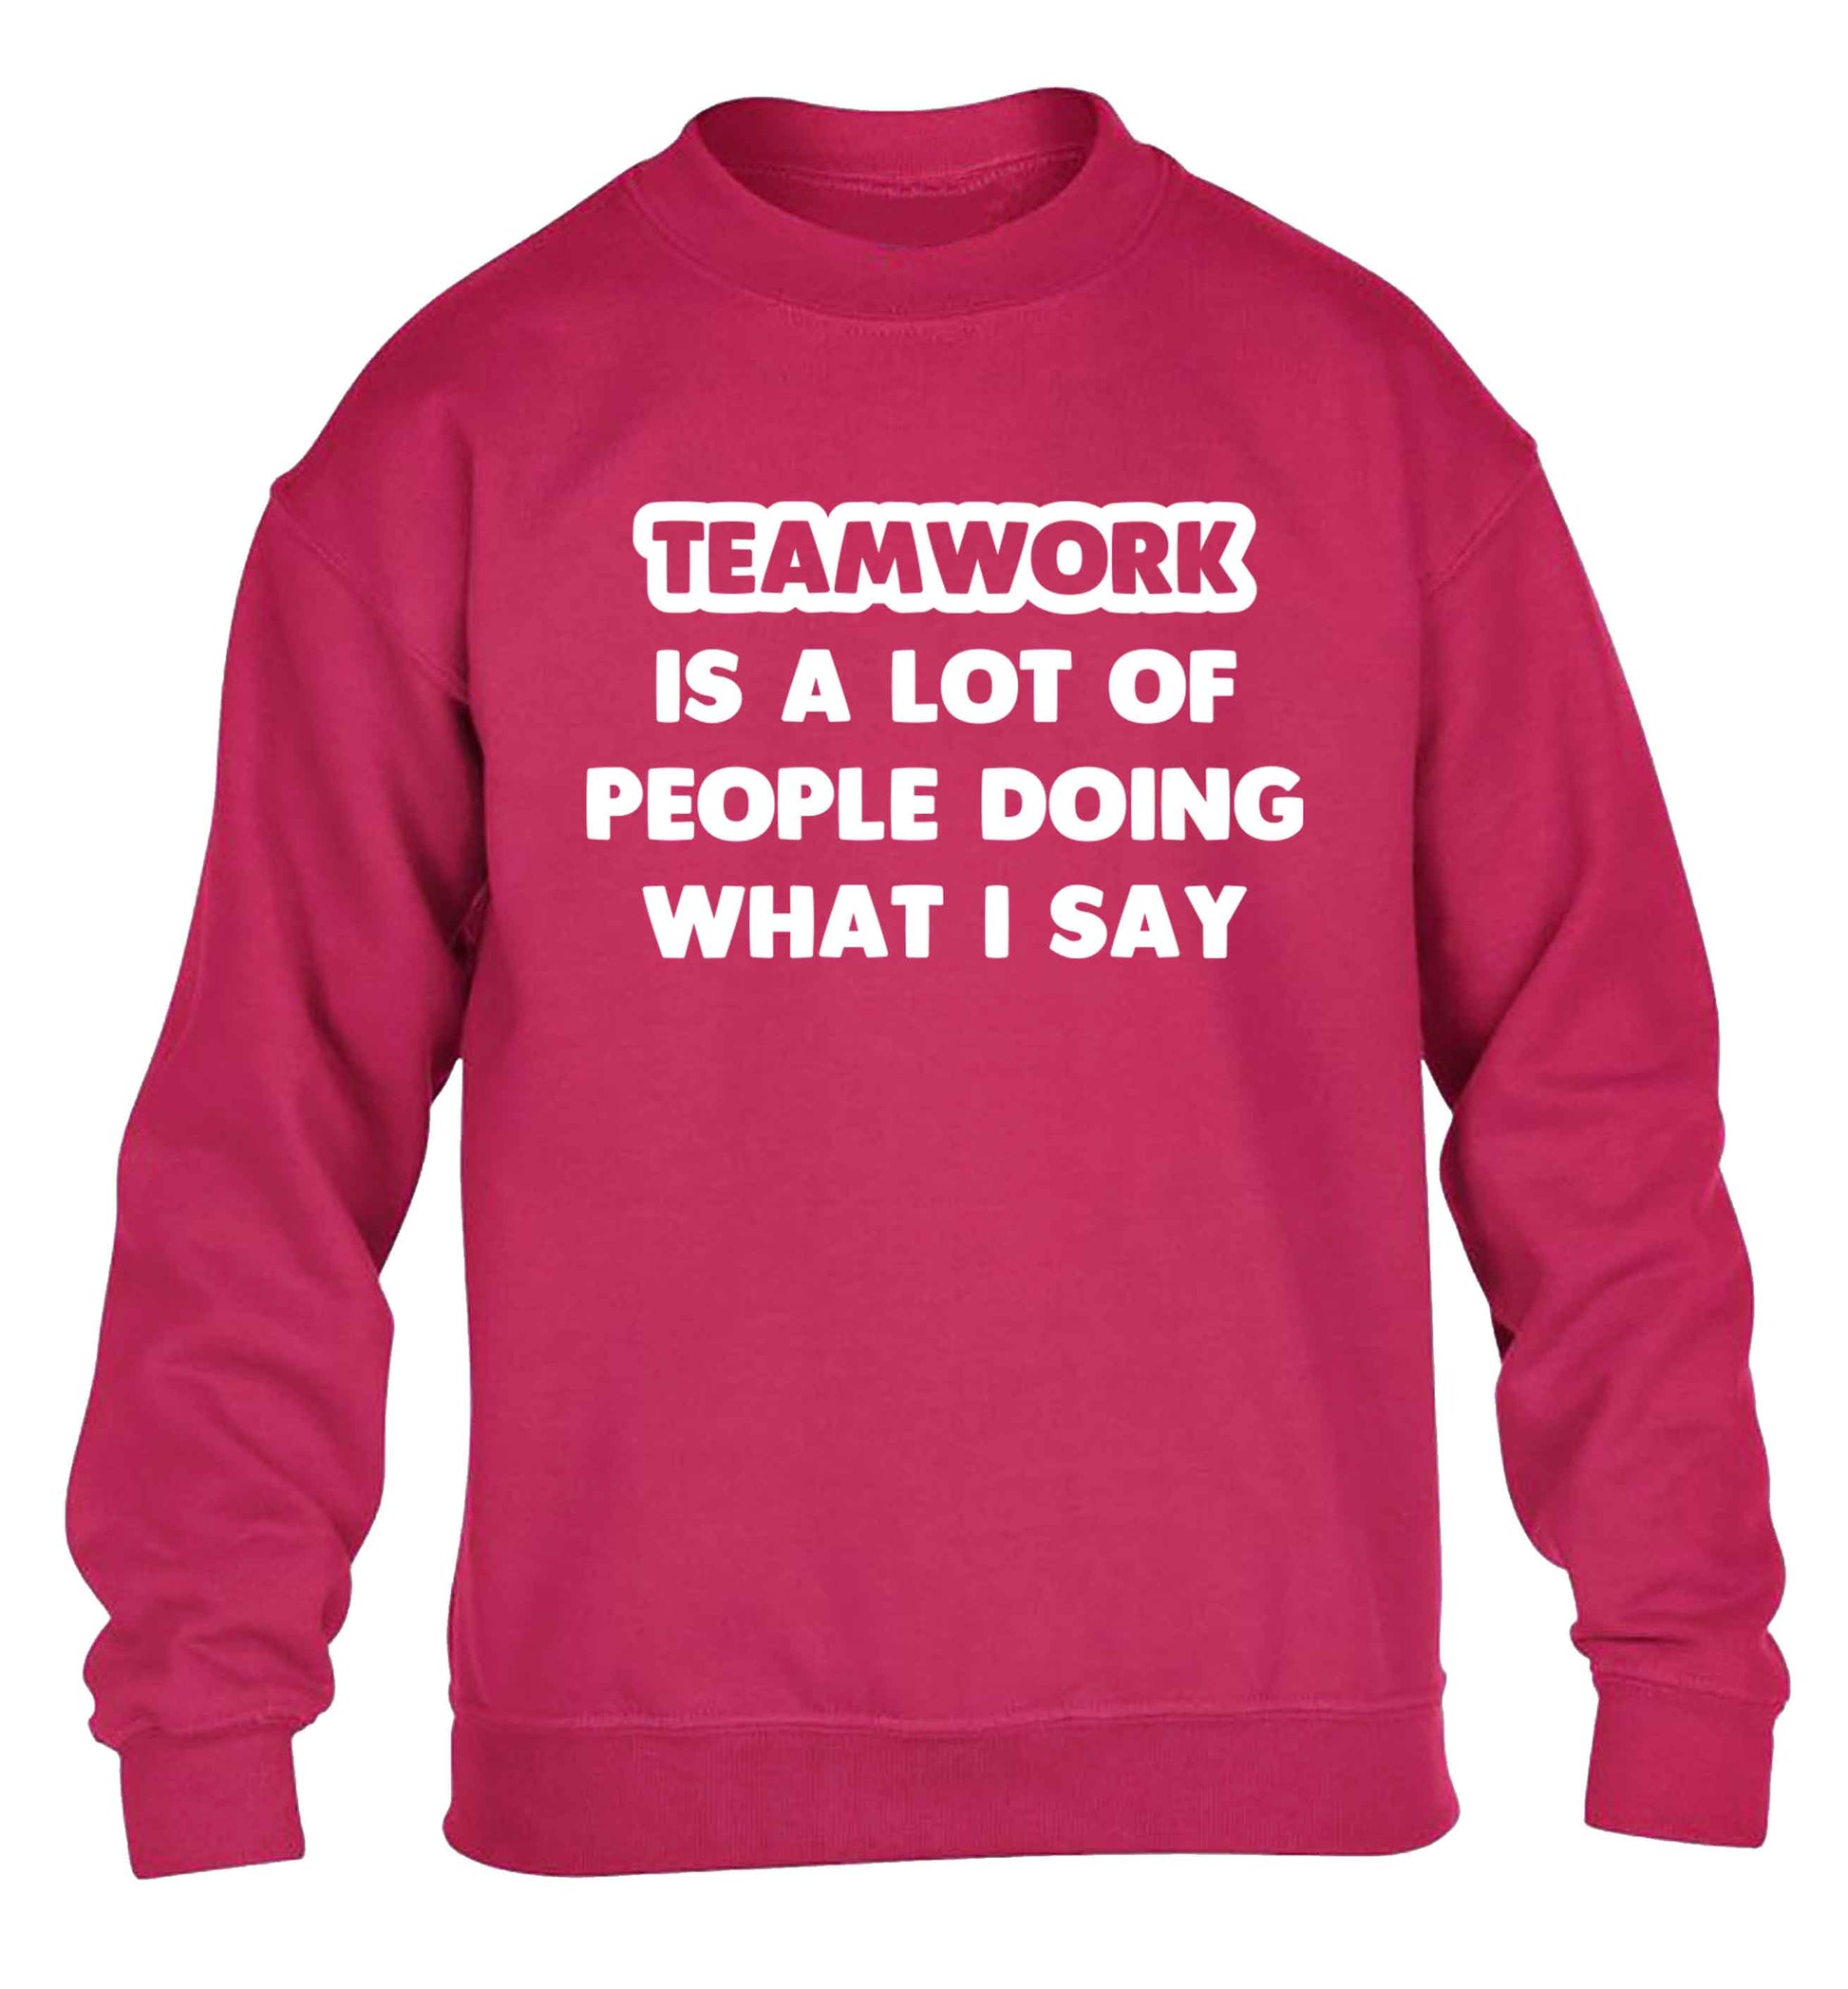 Teamwork is a lot of people doing what I say children's pink sweater 12-13 Years